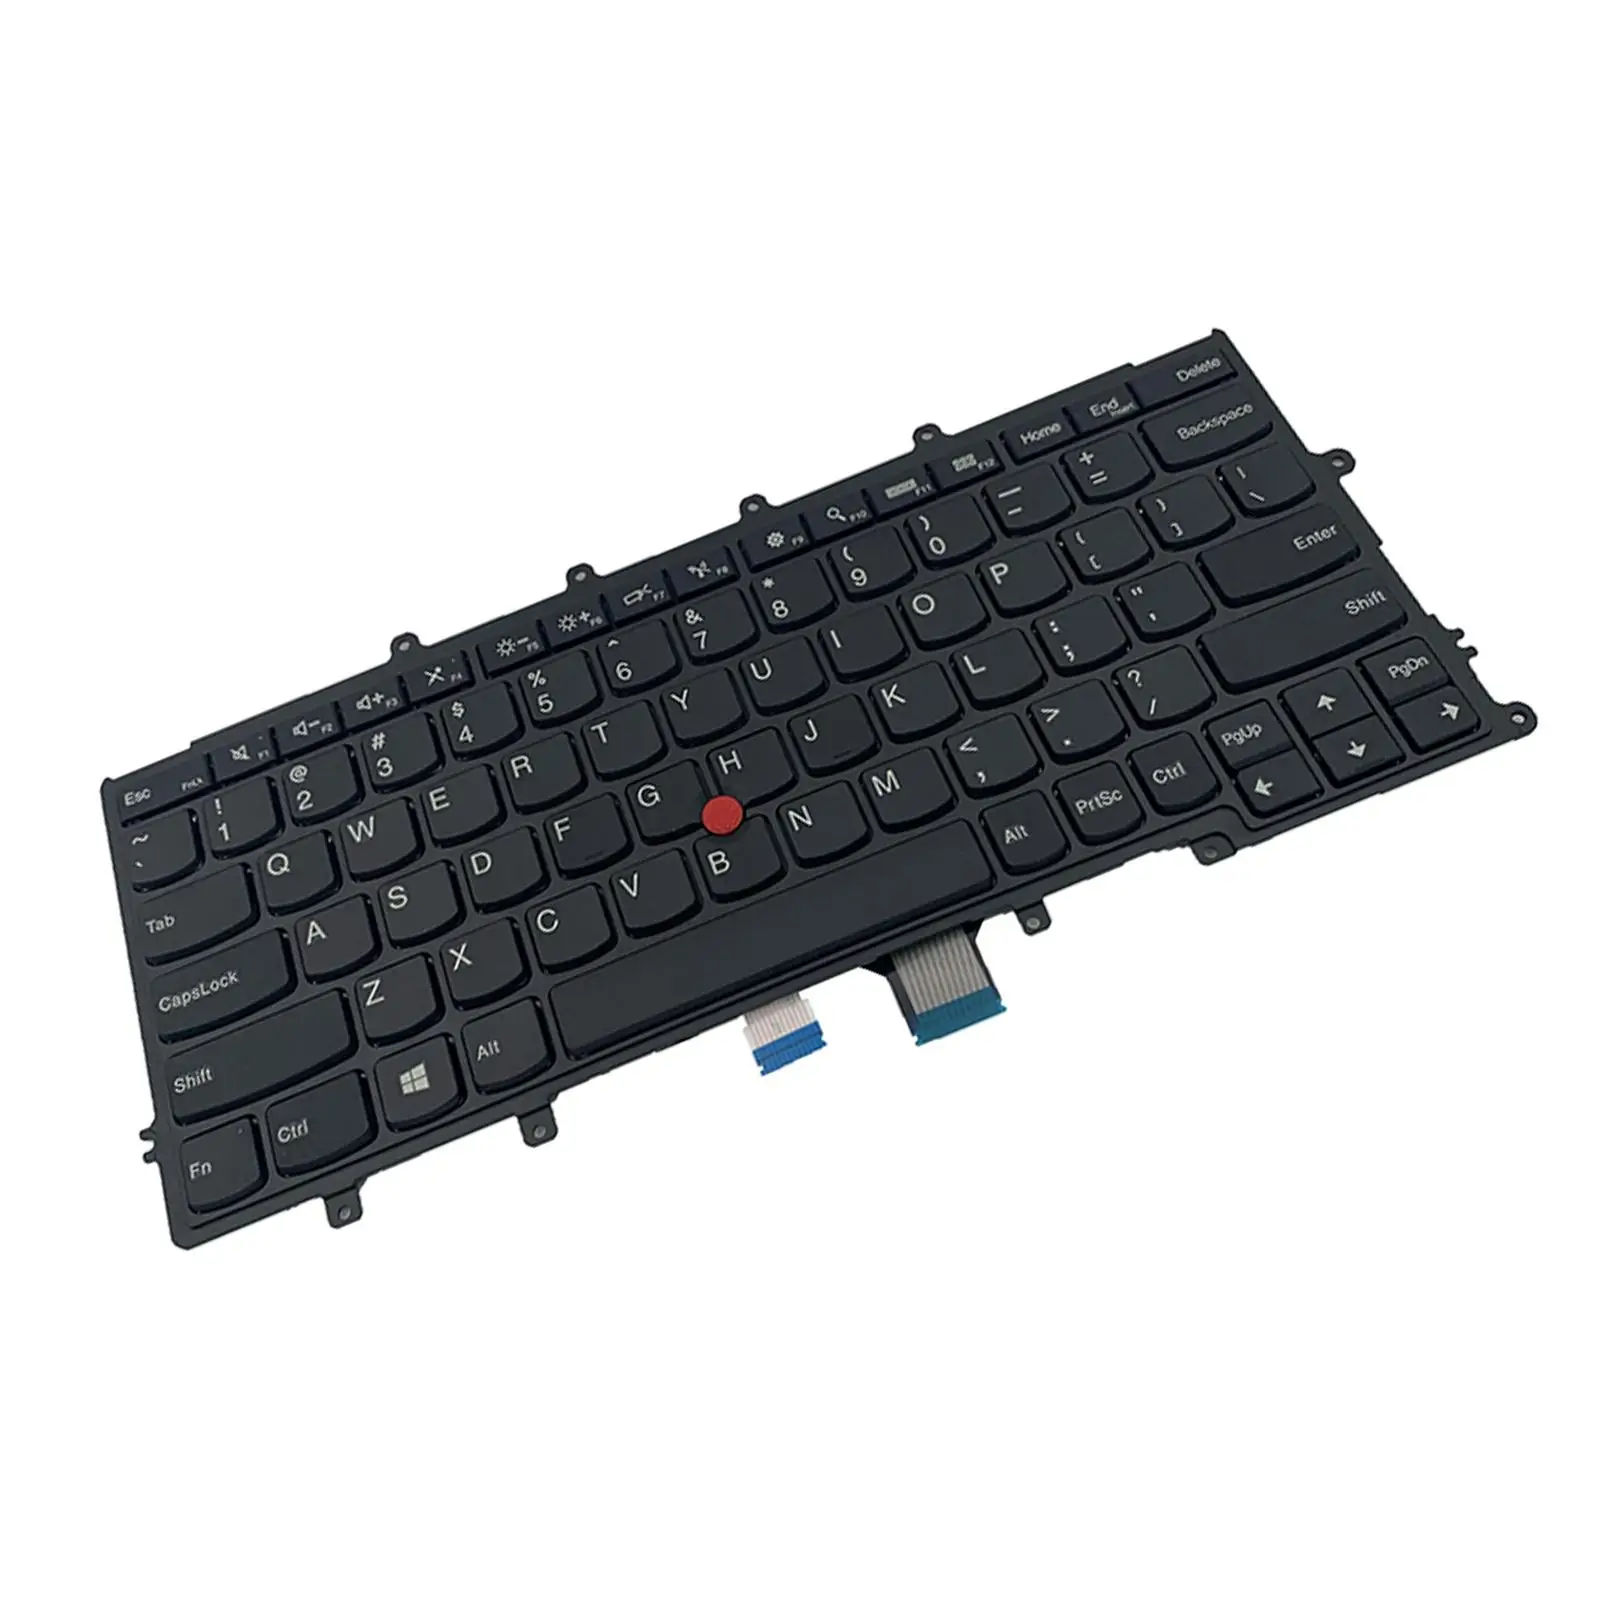 Laptop Keyboard Non Backlit with Pointing Sticks Replacement Keyboard 240/x240S///S/x270 Laptops US Version Black